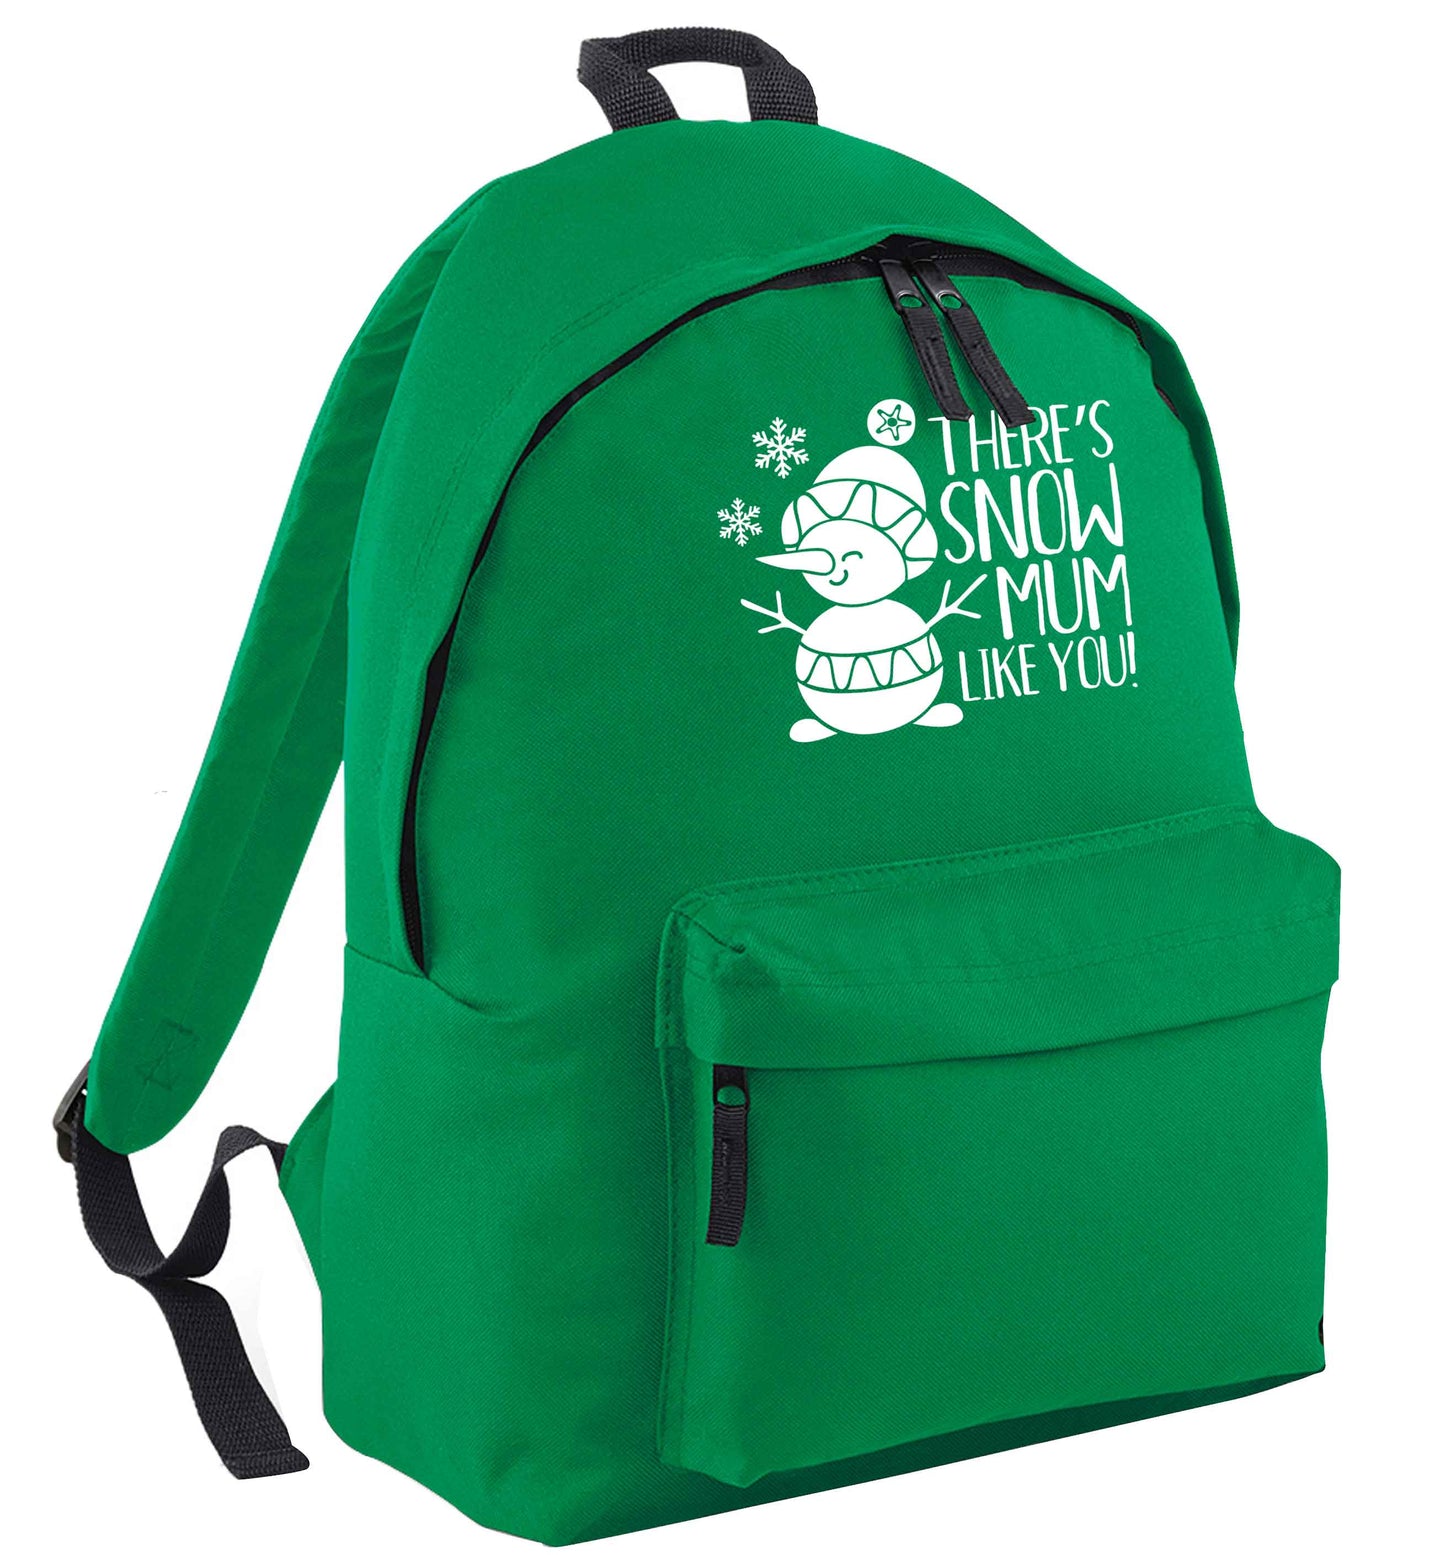 There's snow mum like you green adults backpack